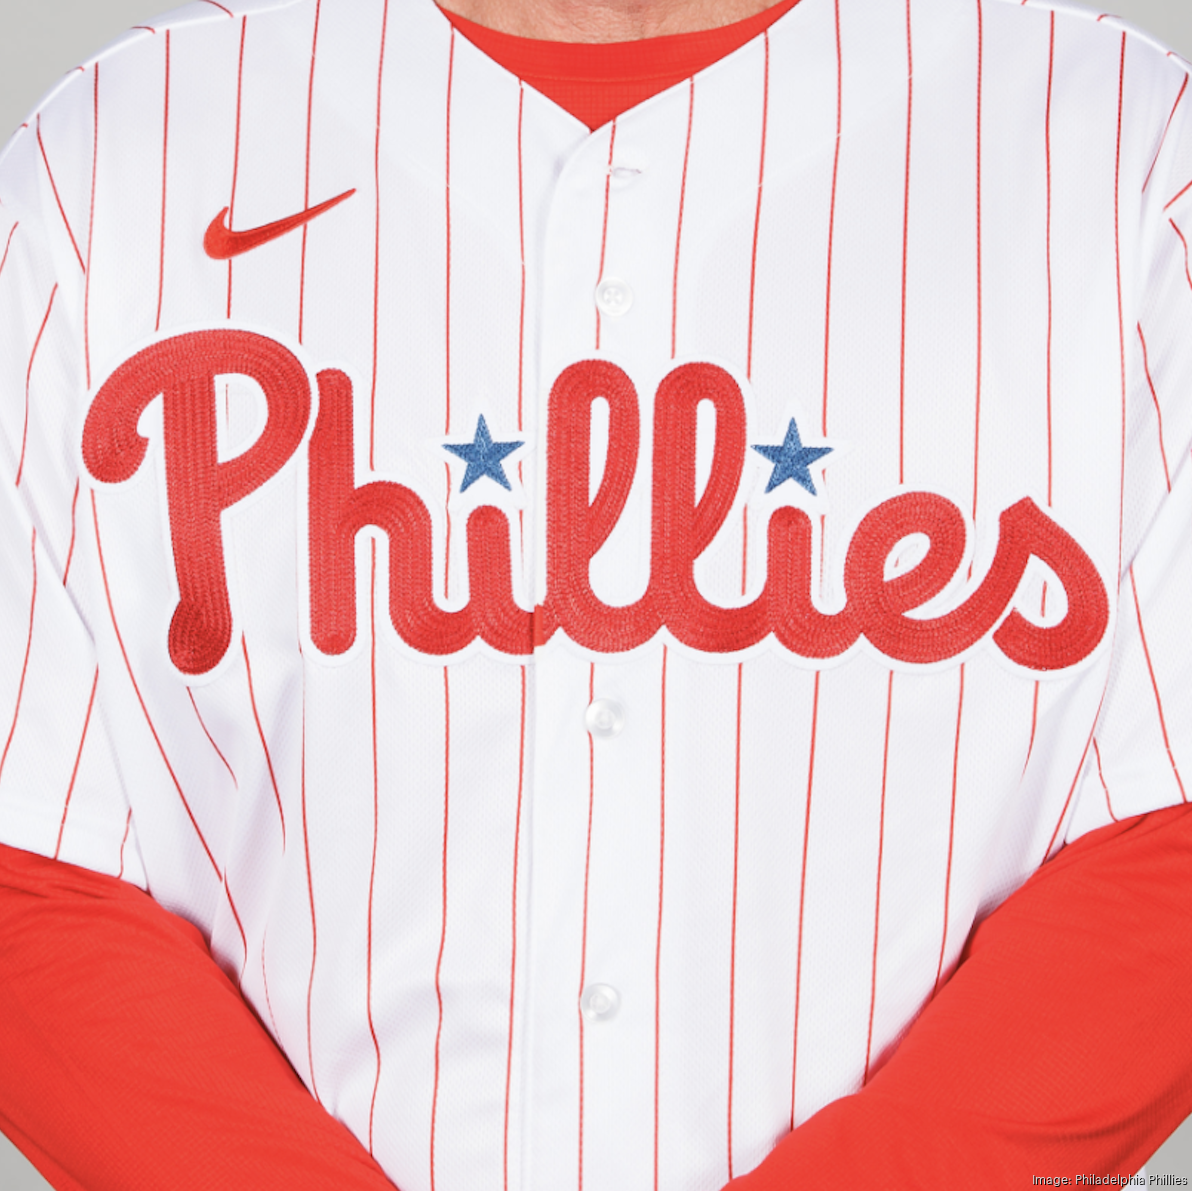 Philadelphia Phillies are in talks with potential jersey patch sponsors and  hope to cash in by Opening Day